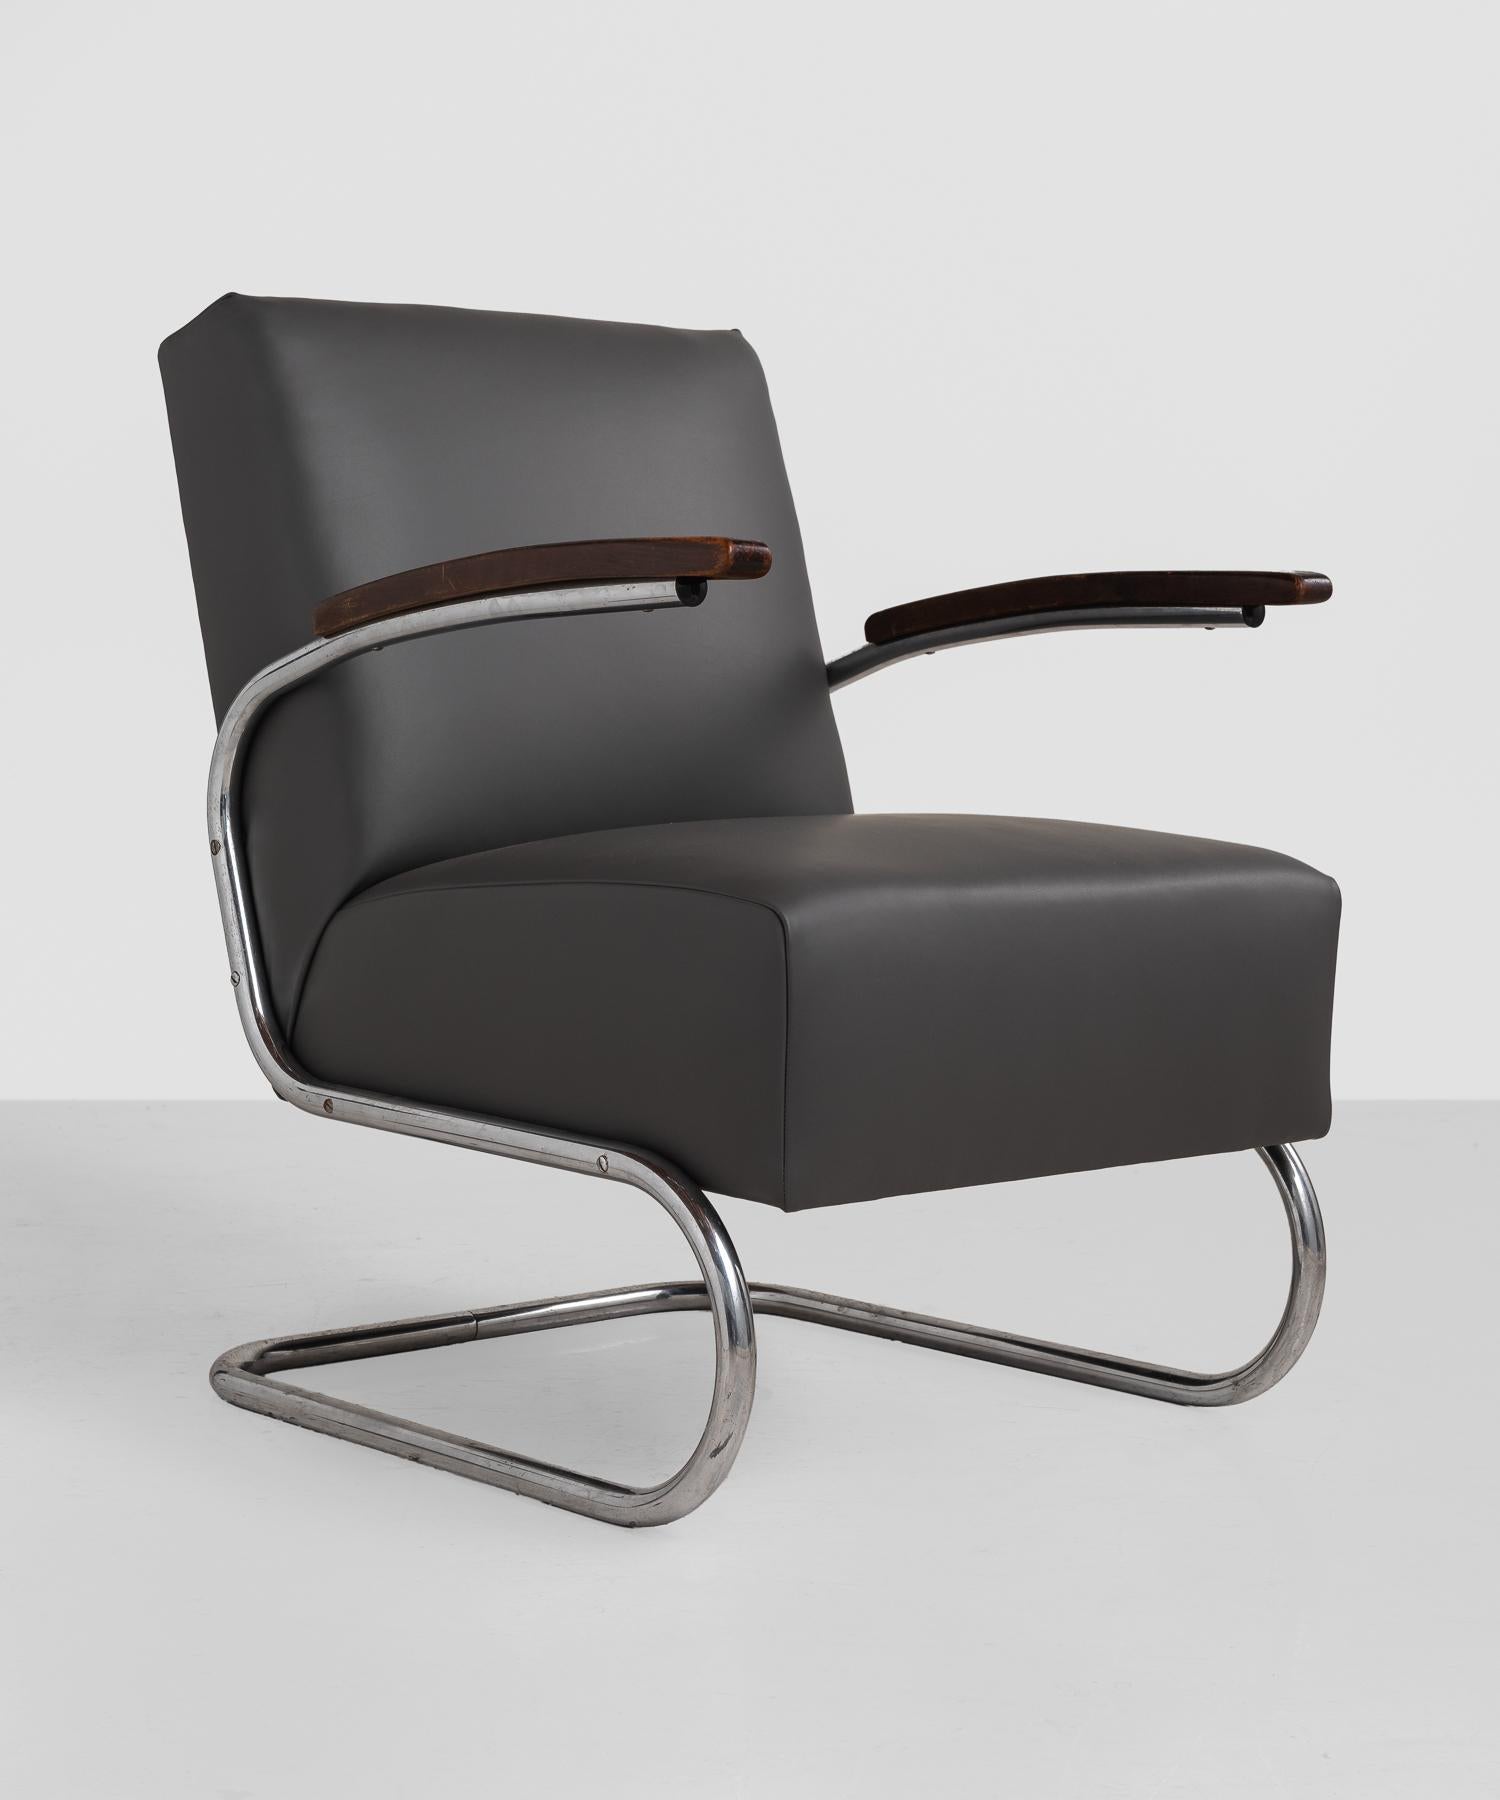 Thonet modern leather armchair, Germany, circa 1930.

Model SS41 Thonet armchair, newly reupholstered in proper leather by Maharam. Cantilever frame in chromed steel with wooden armrests.

Measures: 27.5